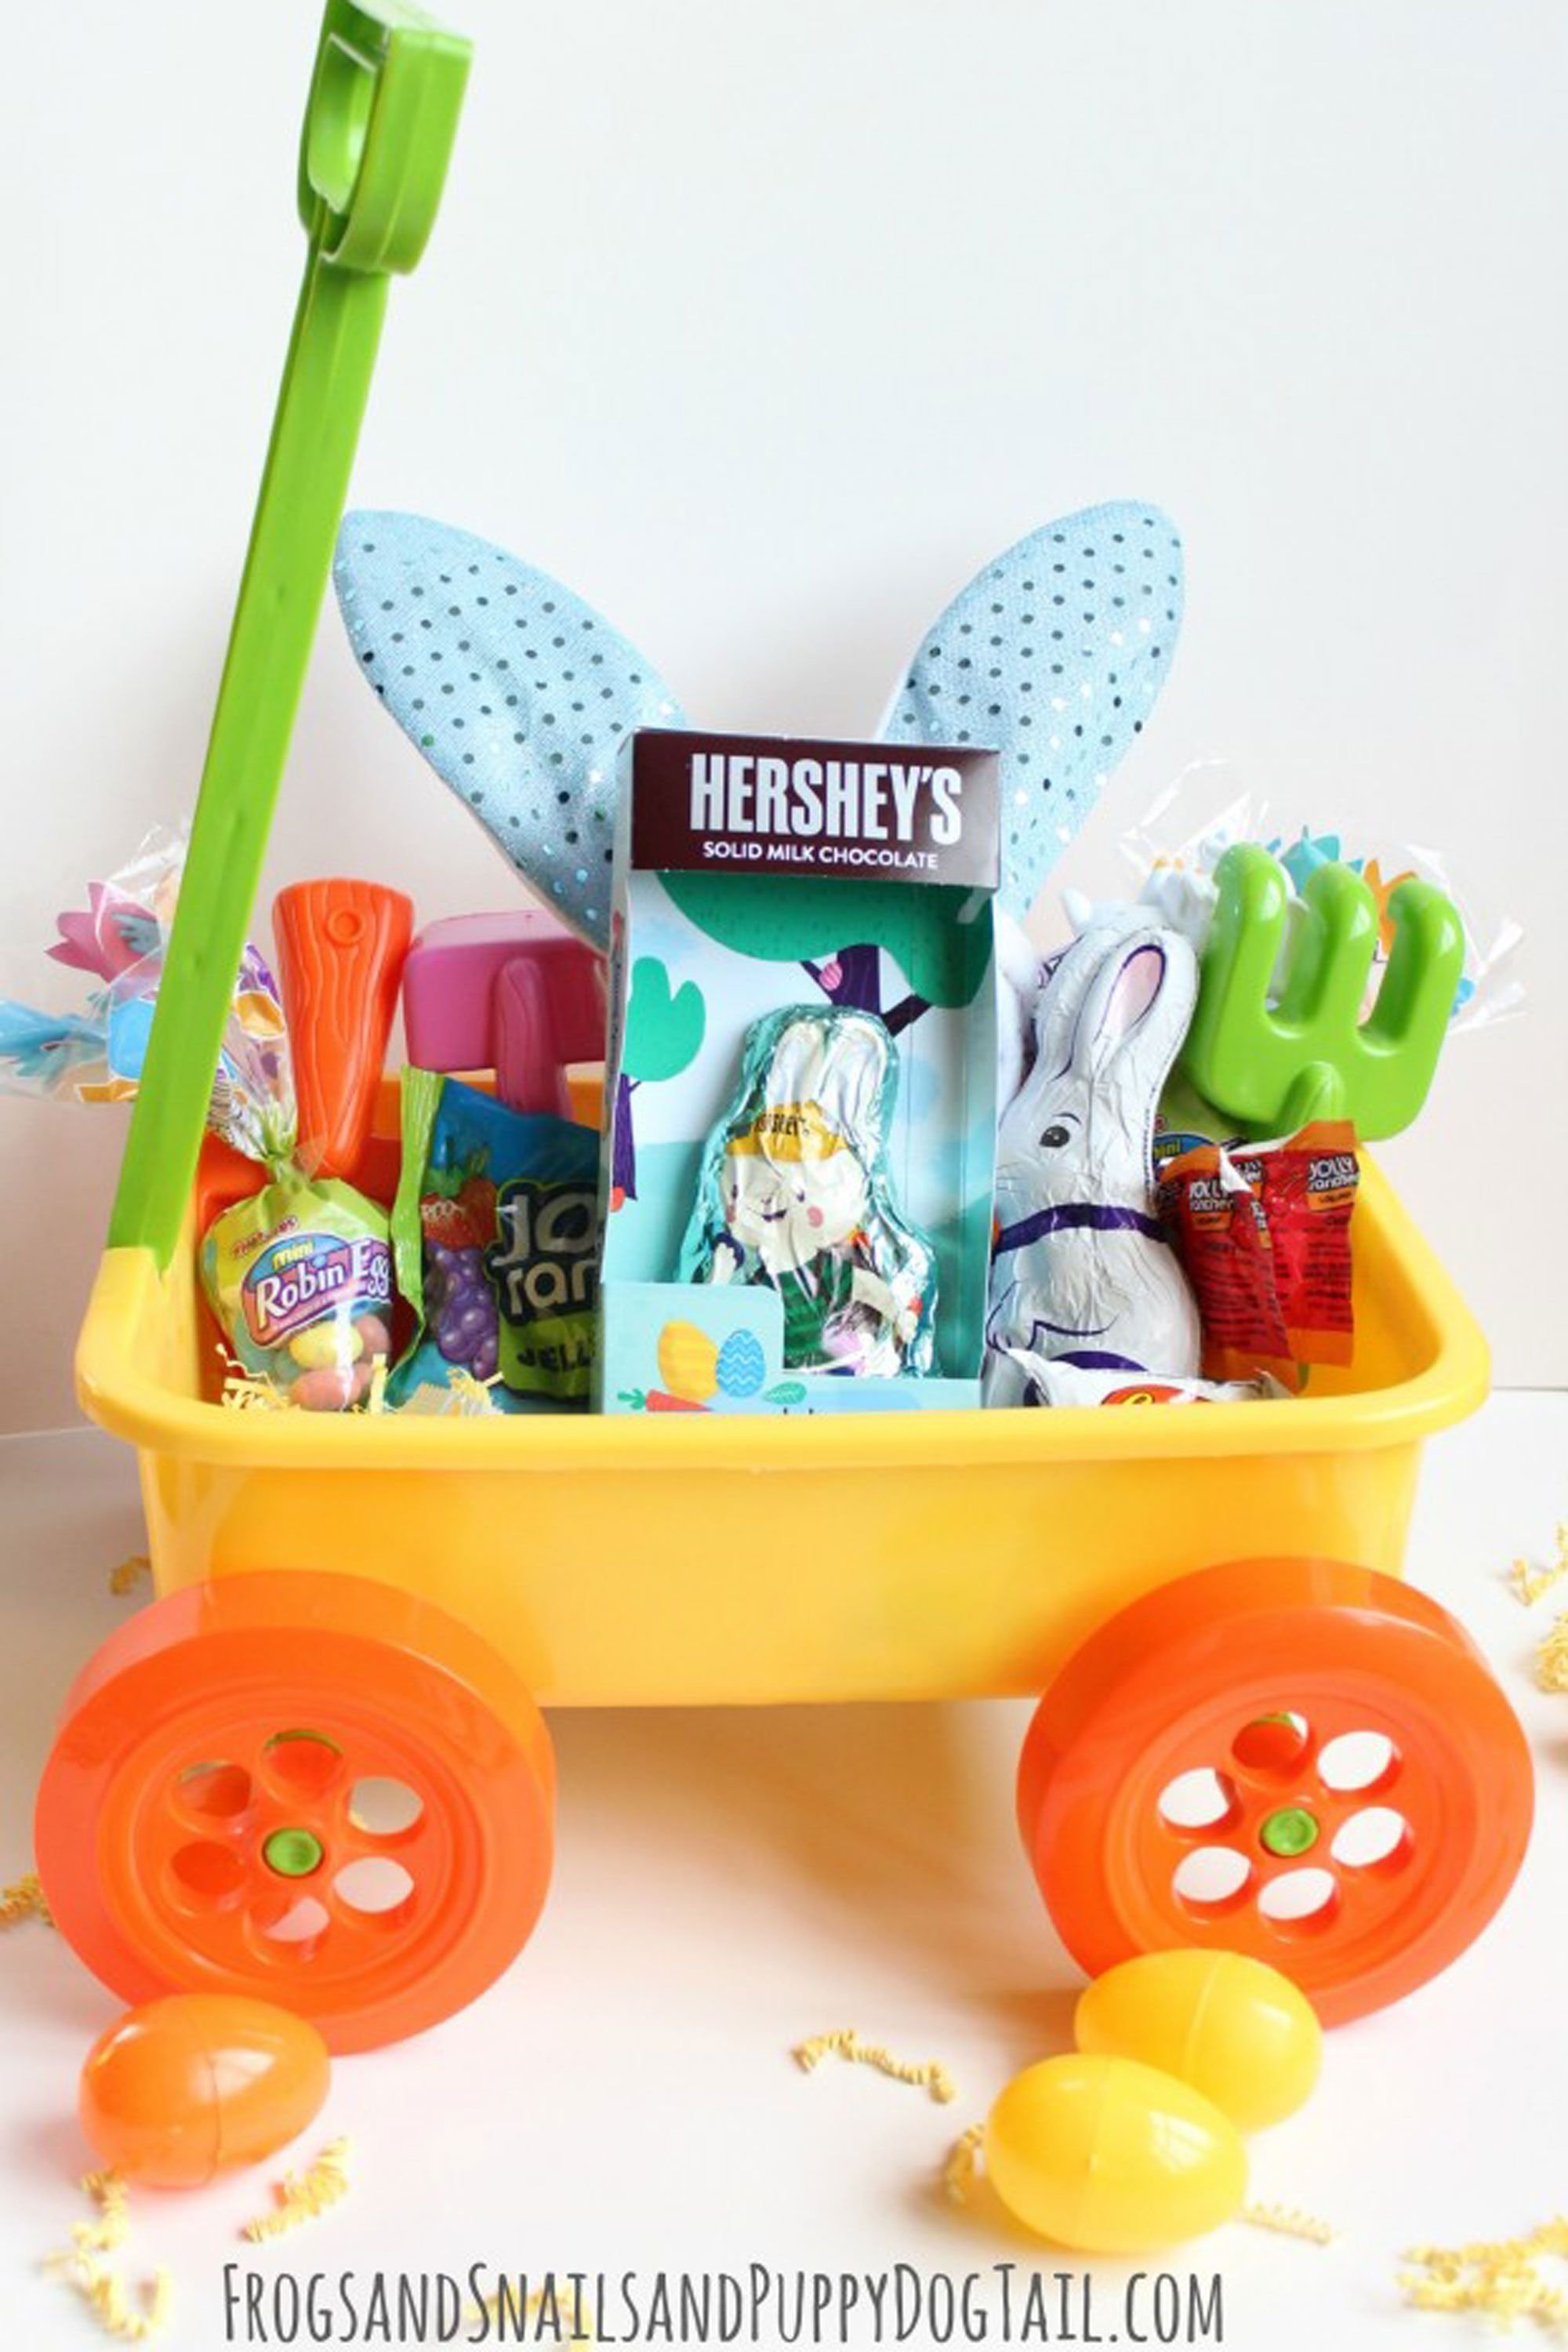 10 Gorgeous Easter Gift Ideas For Kids 16 easter basket ideas for kids best easter gifts for babies 6 2022